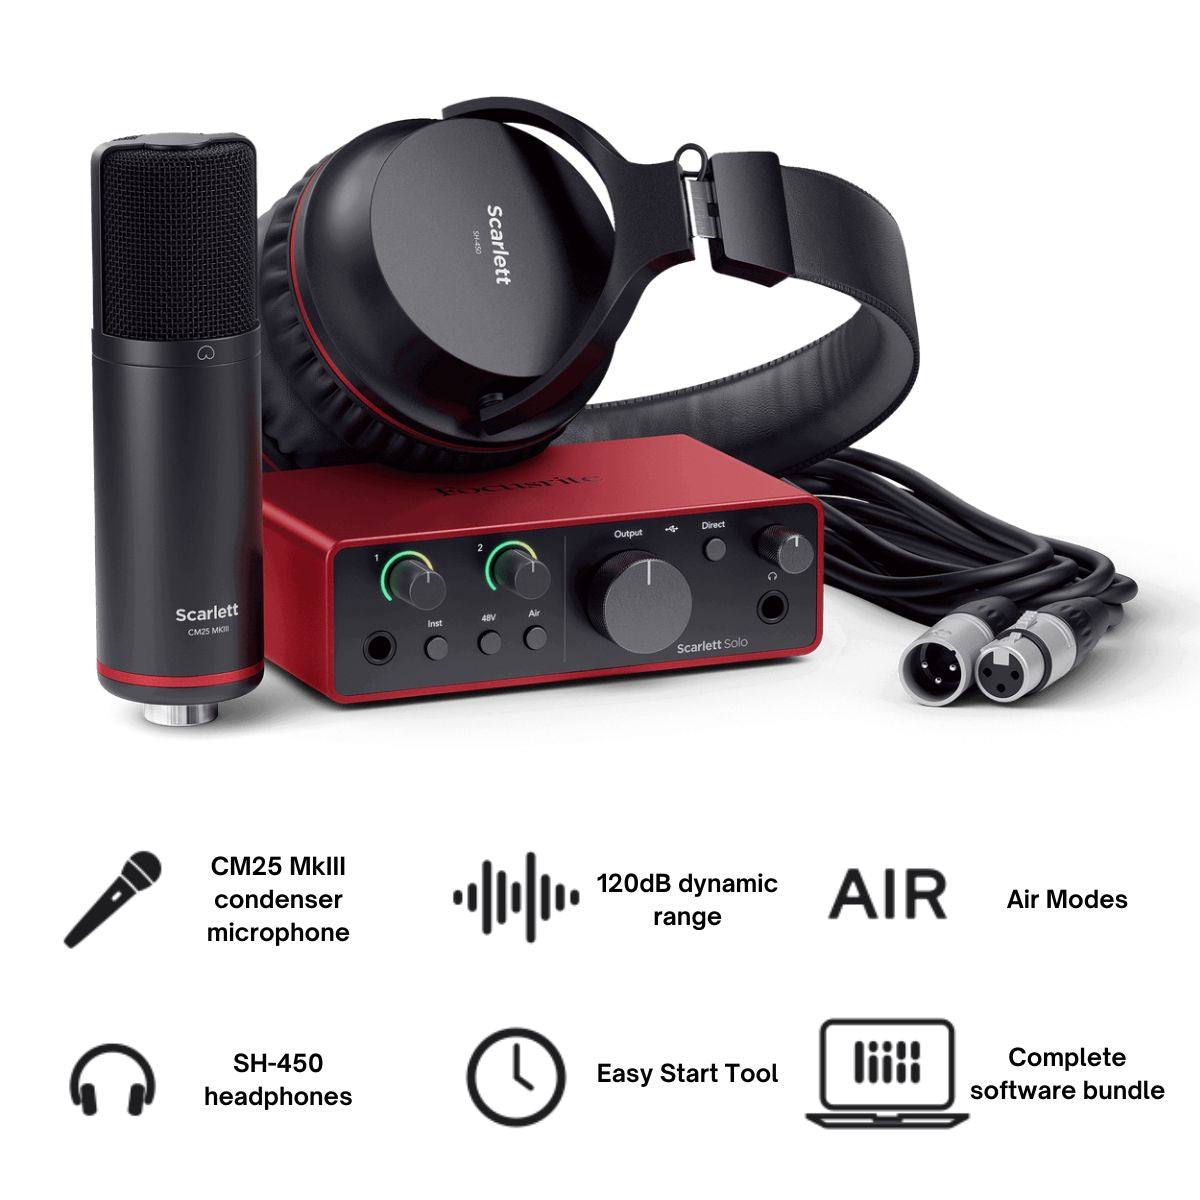 Focusrite Scarlett Solo Studio 4th Gen / 3rd Gen USB Audio Interface with Microphone & Monitor Headphone for Simultaneous Vocals & Guitar Recording